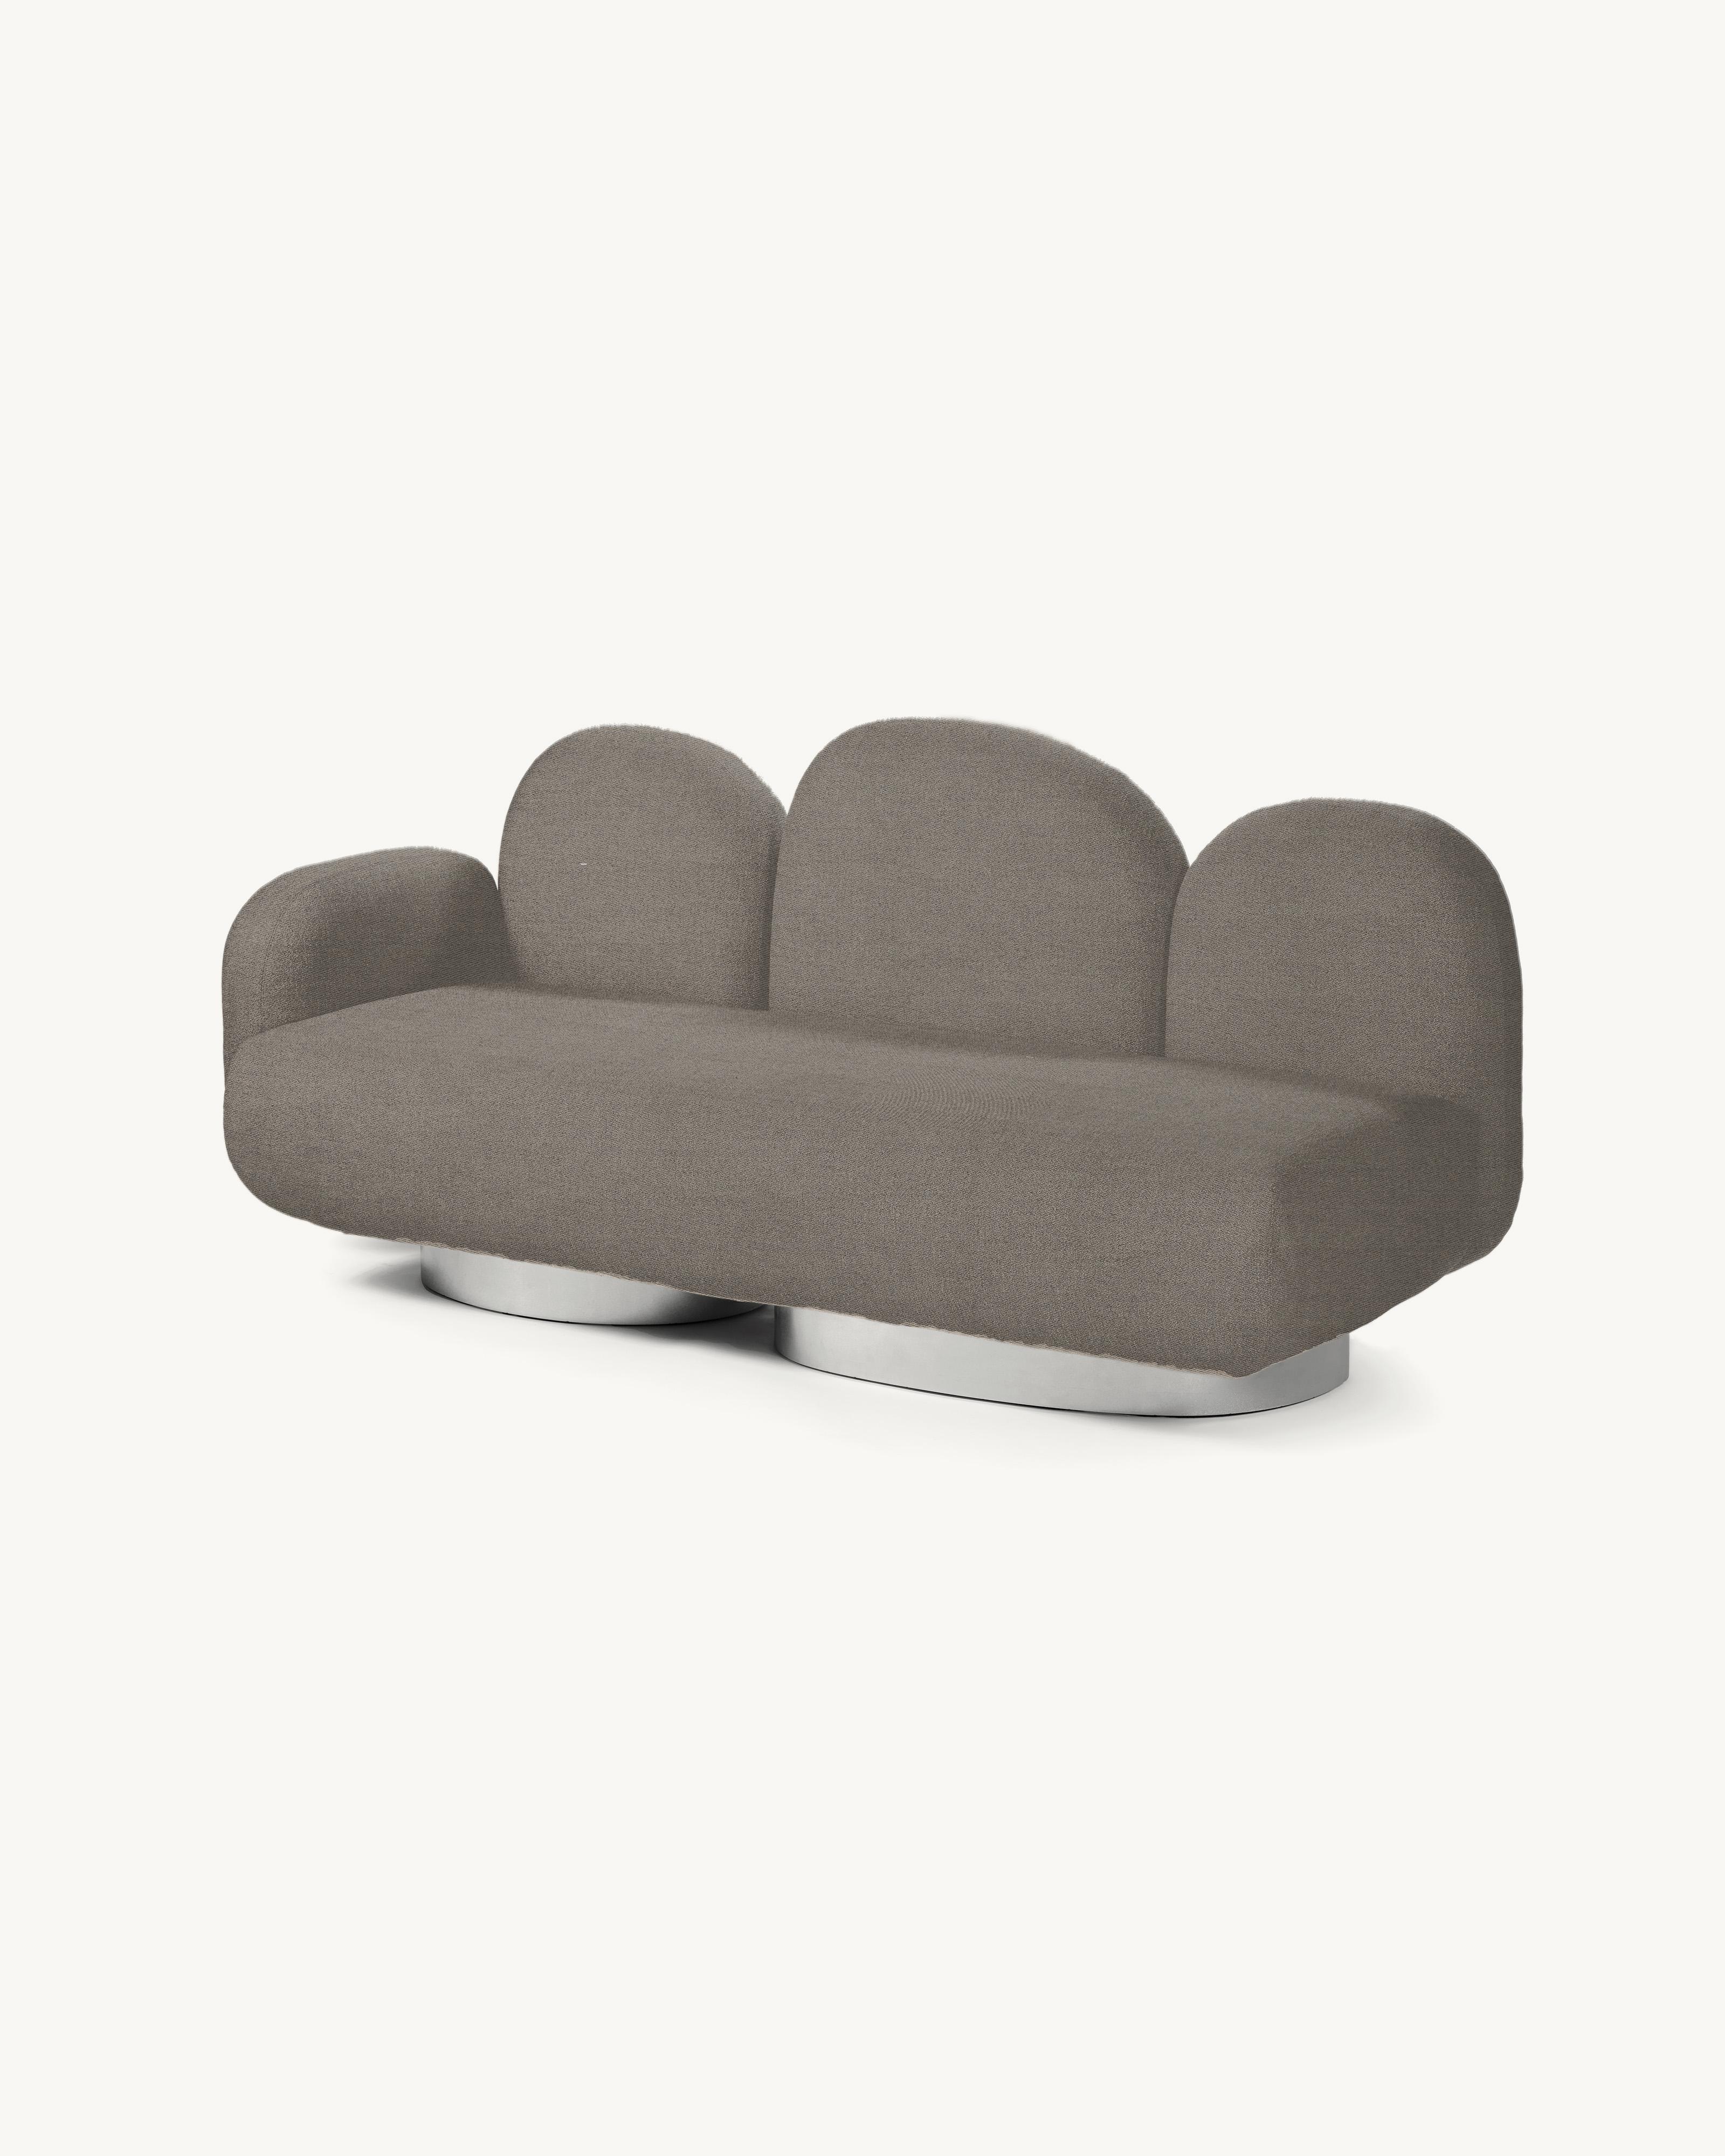 Contemporary Sofa 'Assemble' by Destroyers/Builders, 2 seaters + 1 armrest For Sale 5